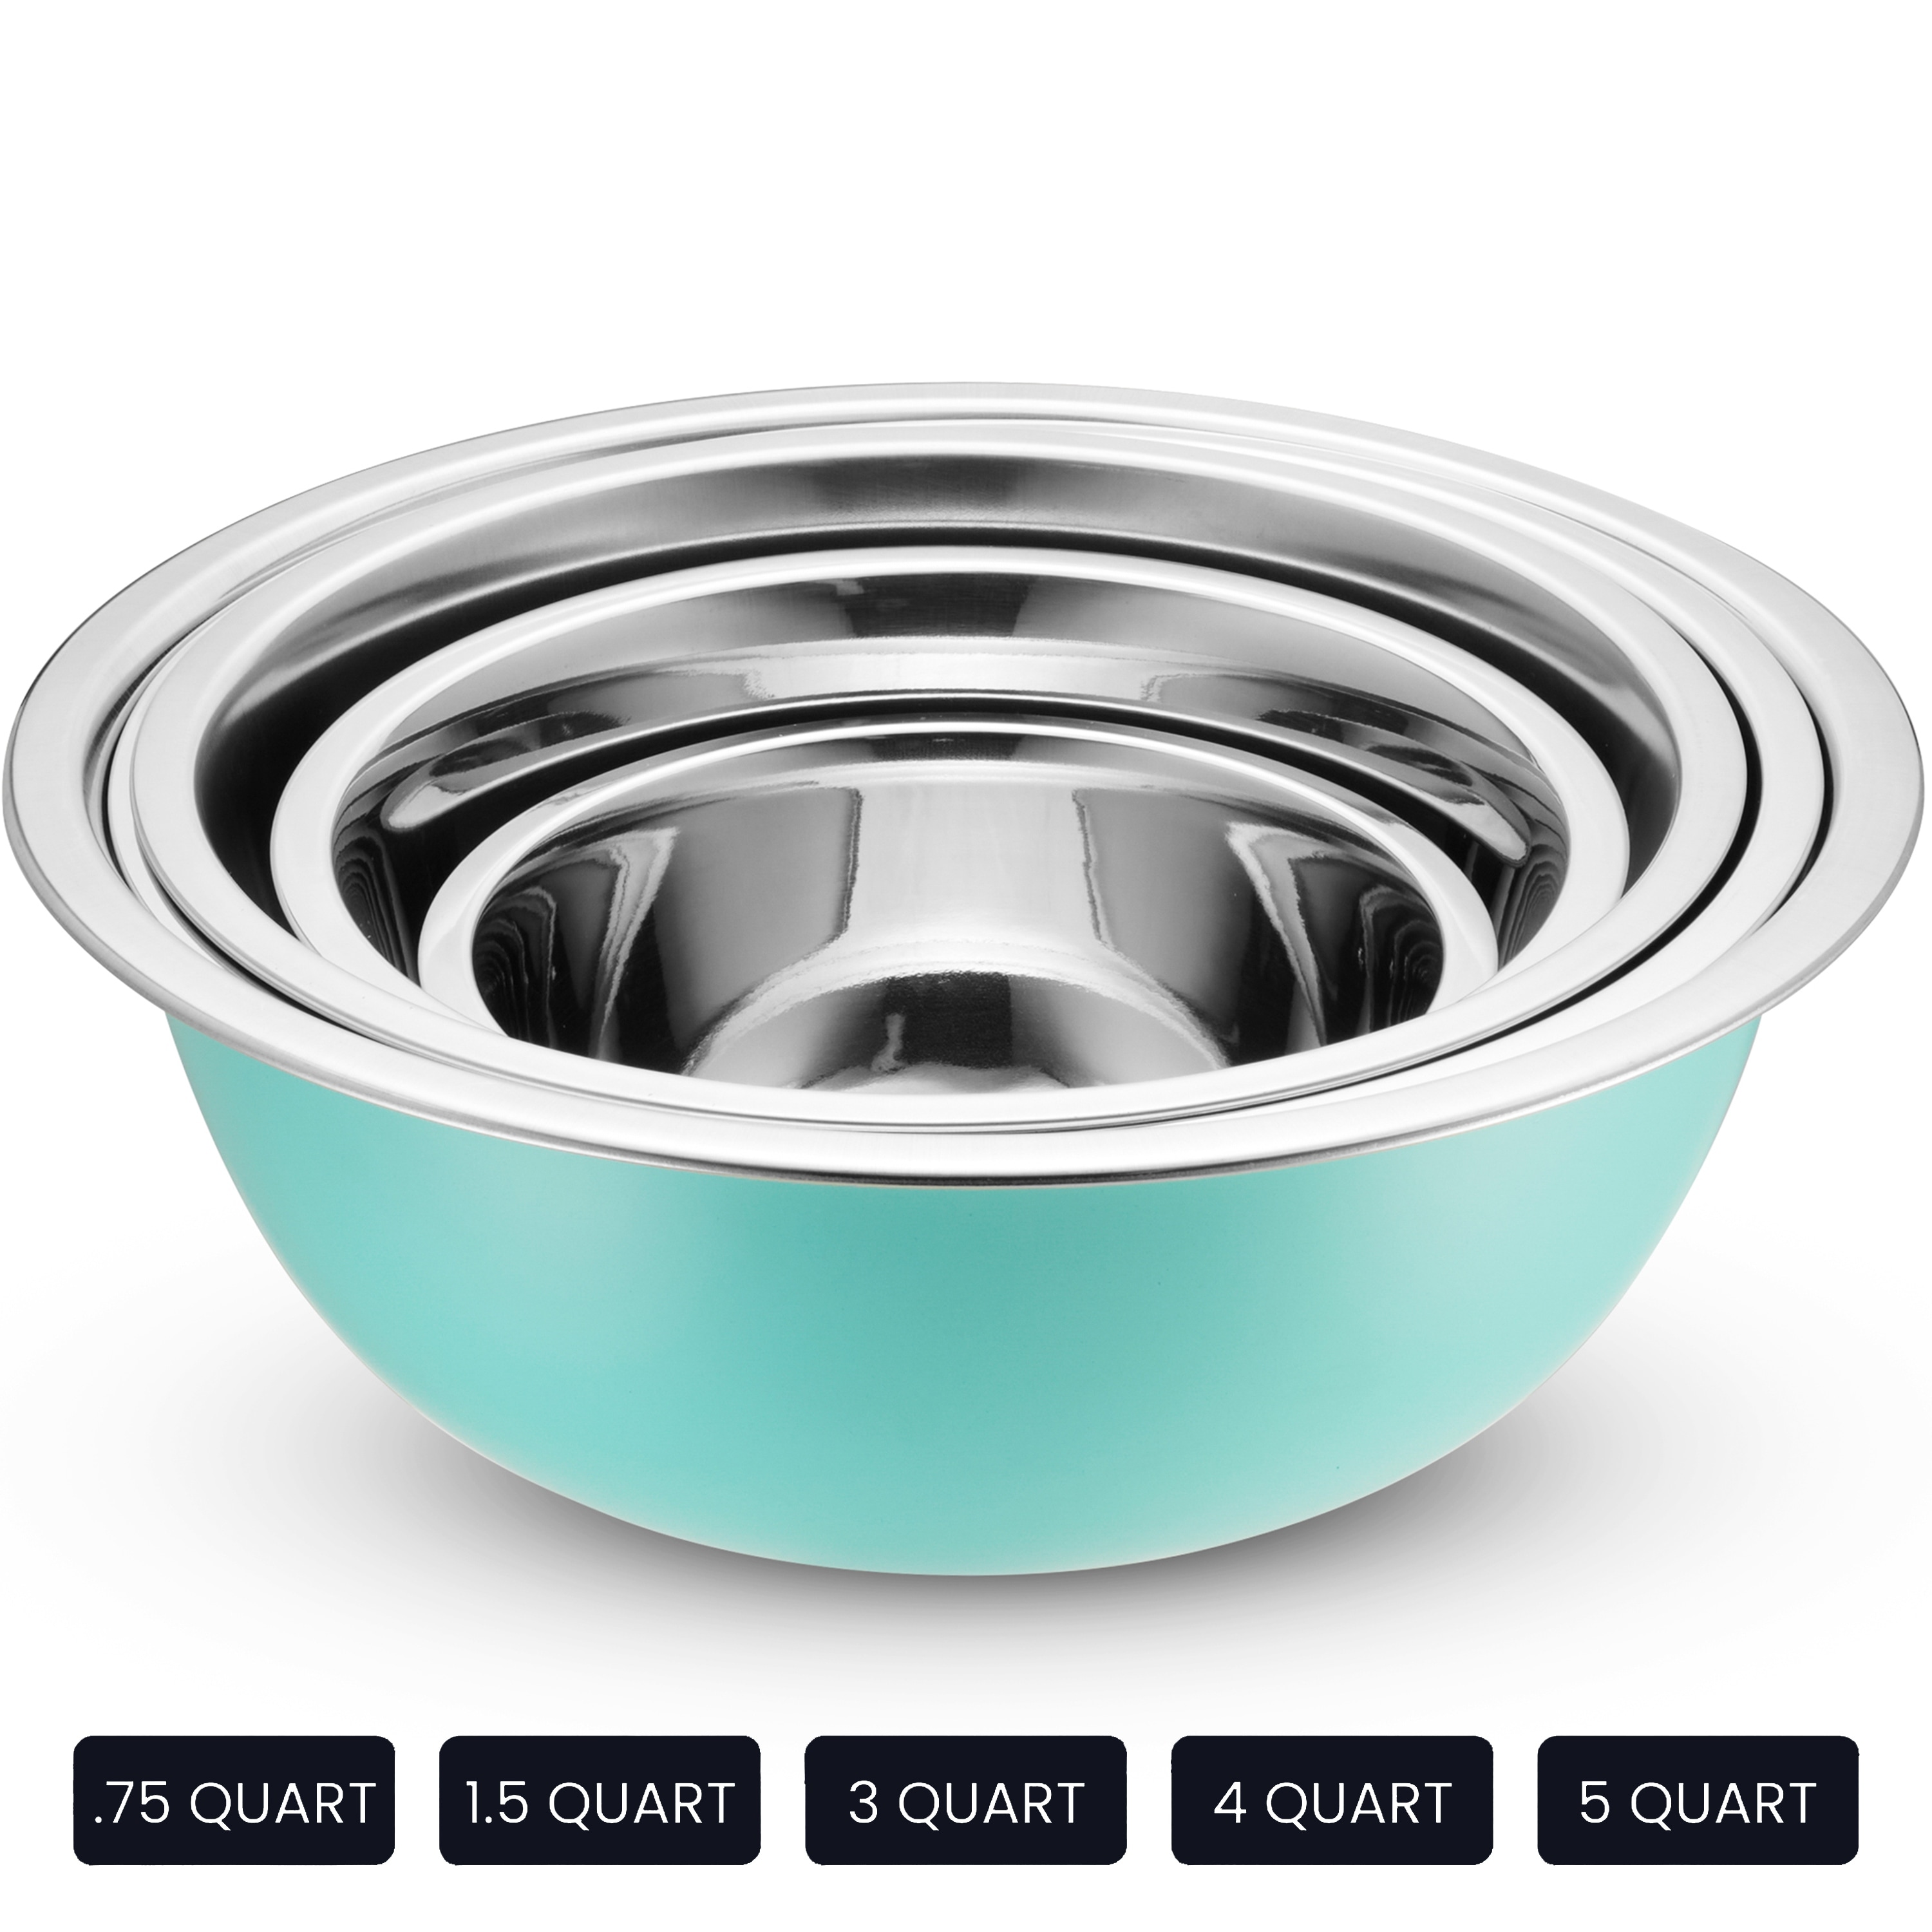 https://ak1.ostkcdn.com/images/products/is/images/direct/2543a1eee78f7a7f8f6625df0d583f44771ec02c/Heavy-Duty-Meal-Prep-Stainless-Steel-Mixing-Bowls-Set-with-Lids.jpg